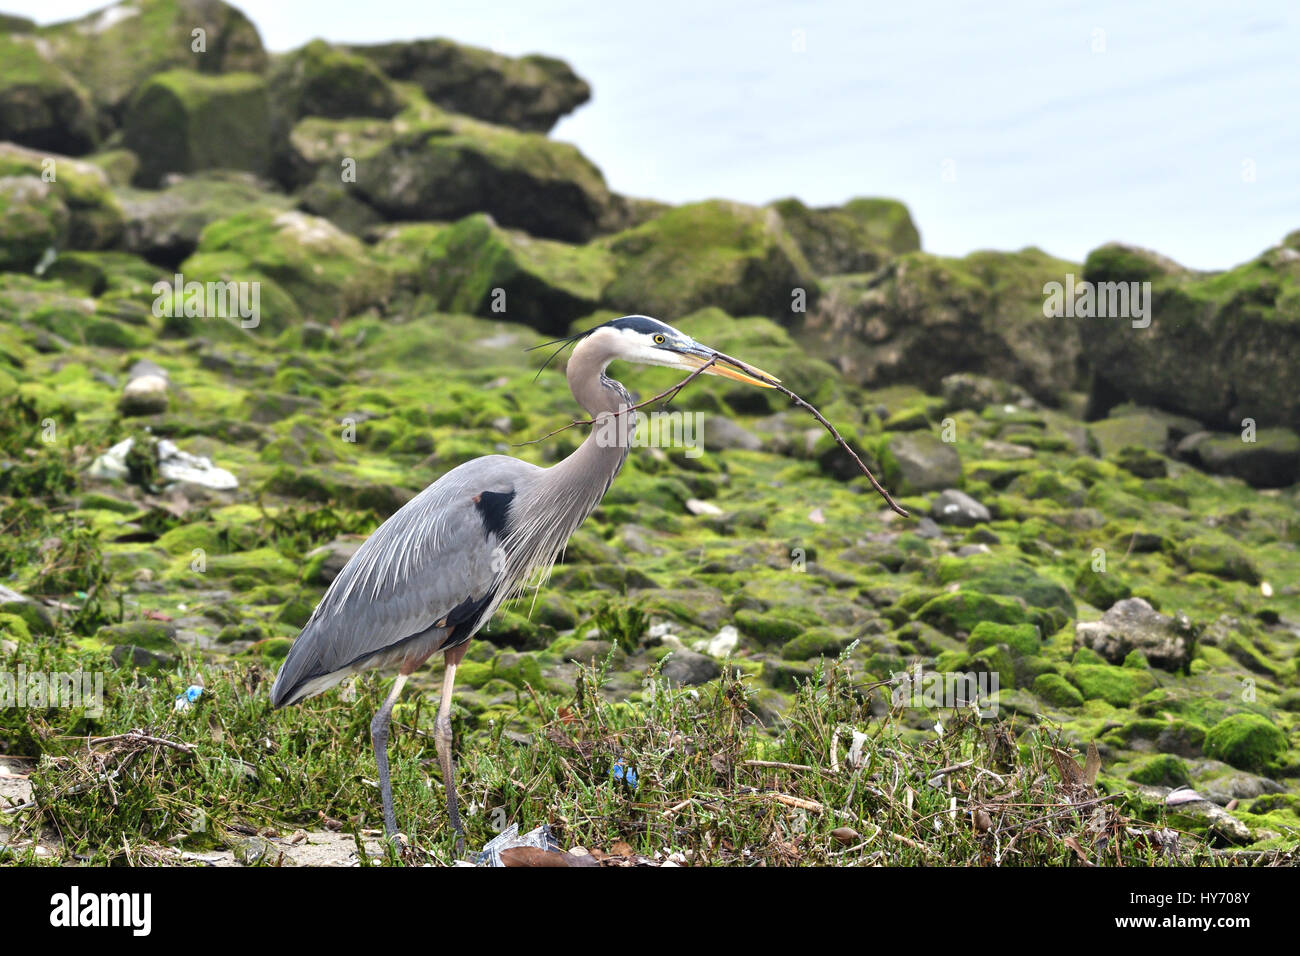 Great blue heron fetching a stick.  Too bad there is litter along the shore :(.  Ballona Creek, Los Angeles, CA Stock Photo